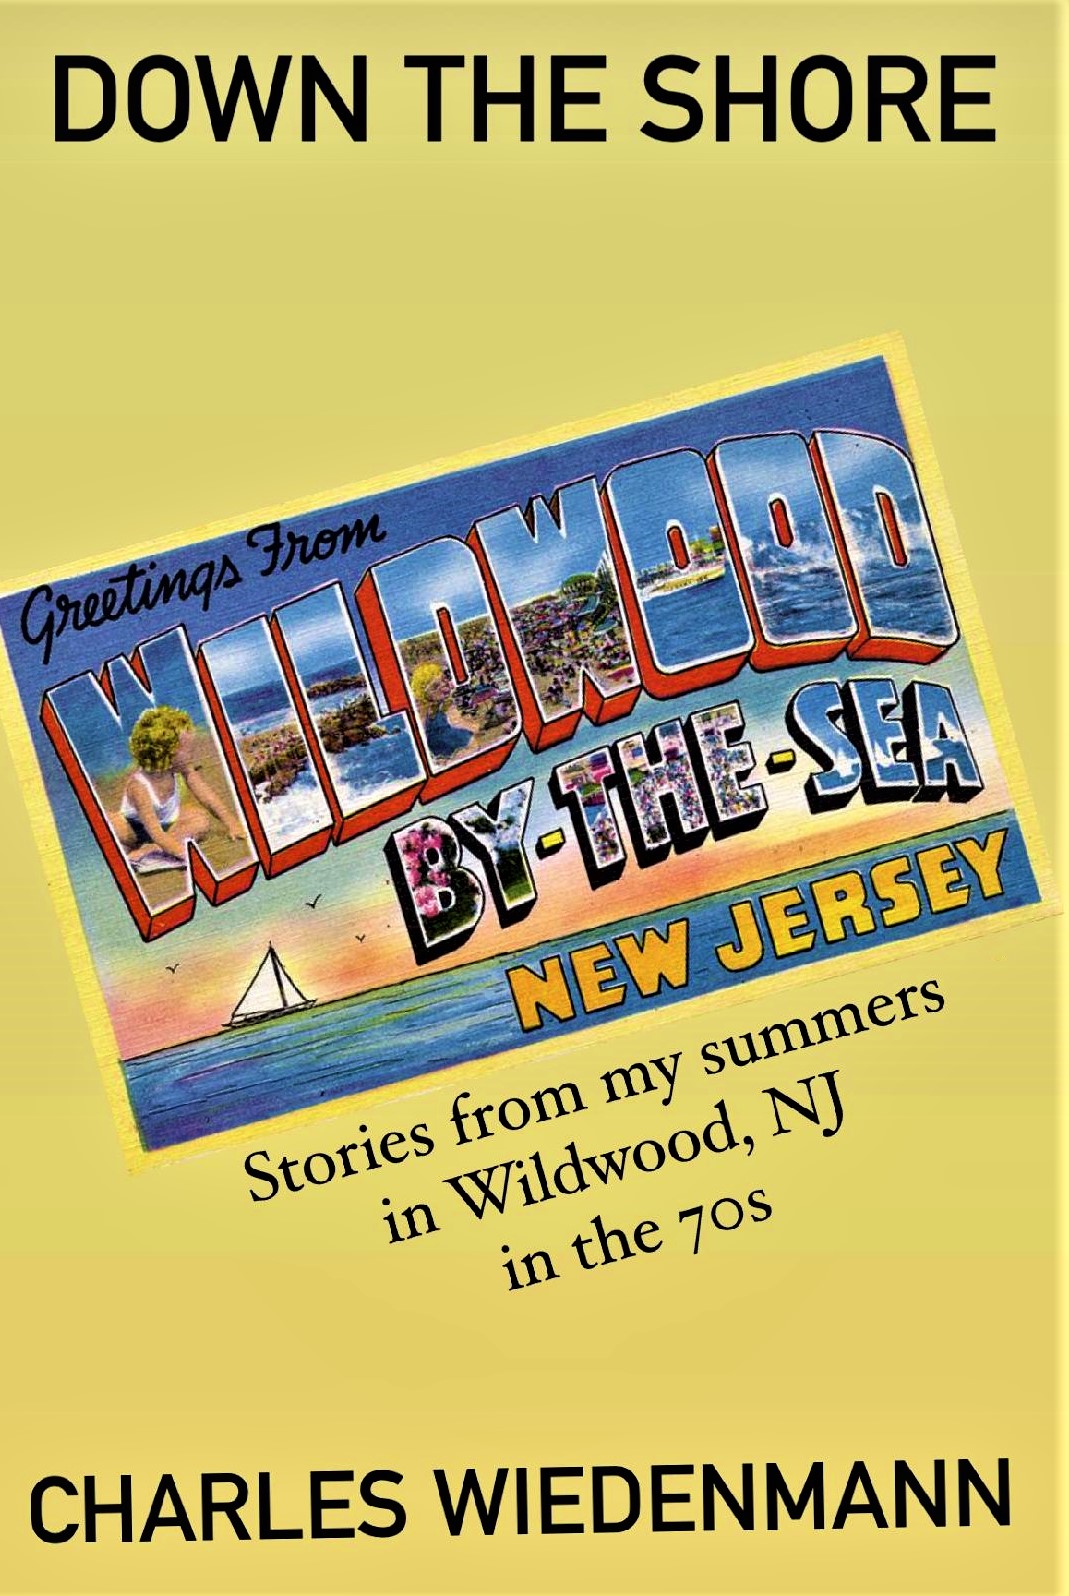 A Dream Realized: My Unforgettable Day at the Wildwood Historical Society